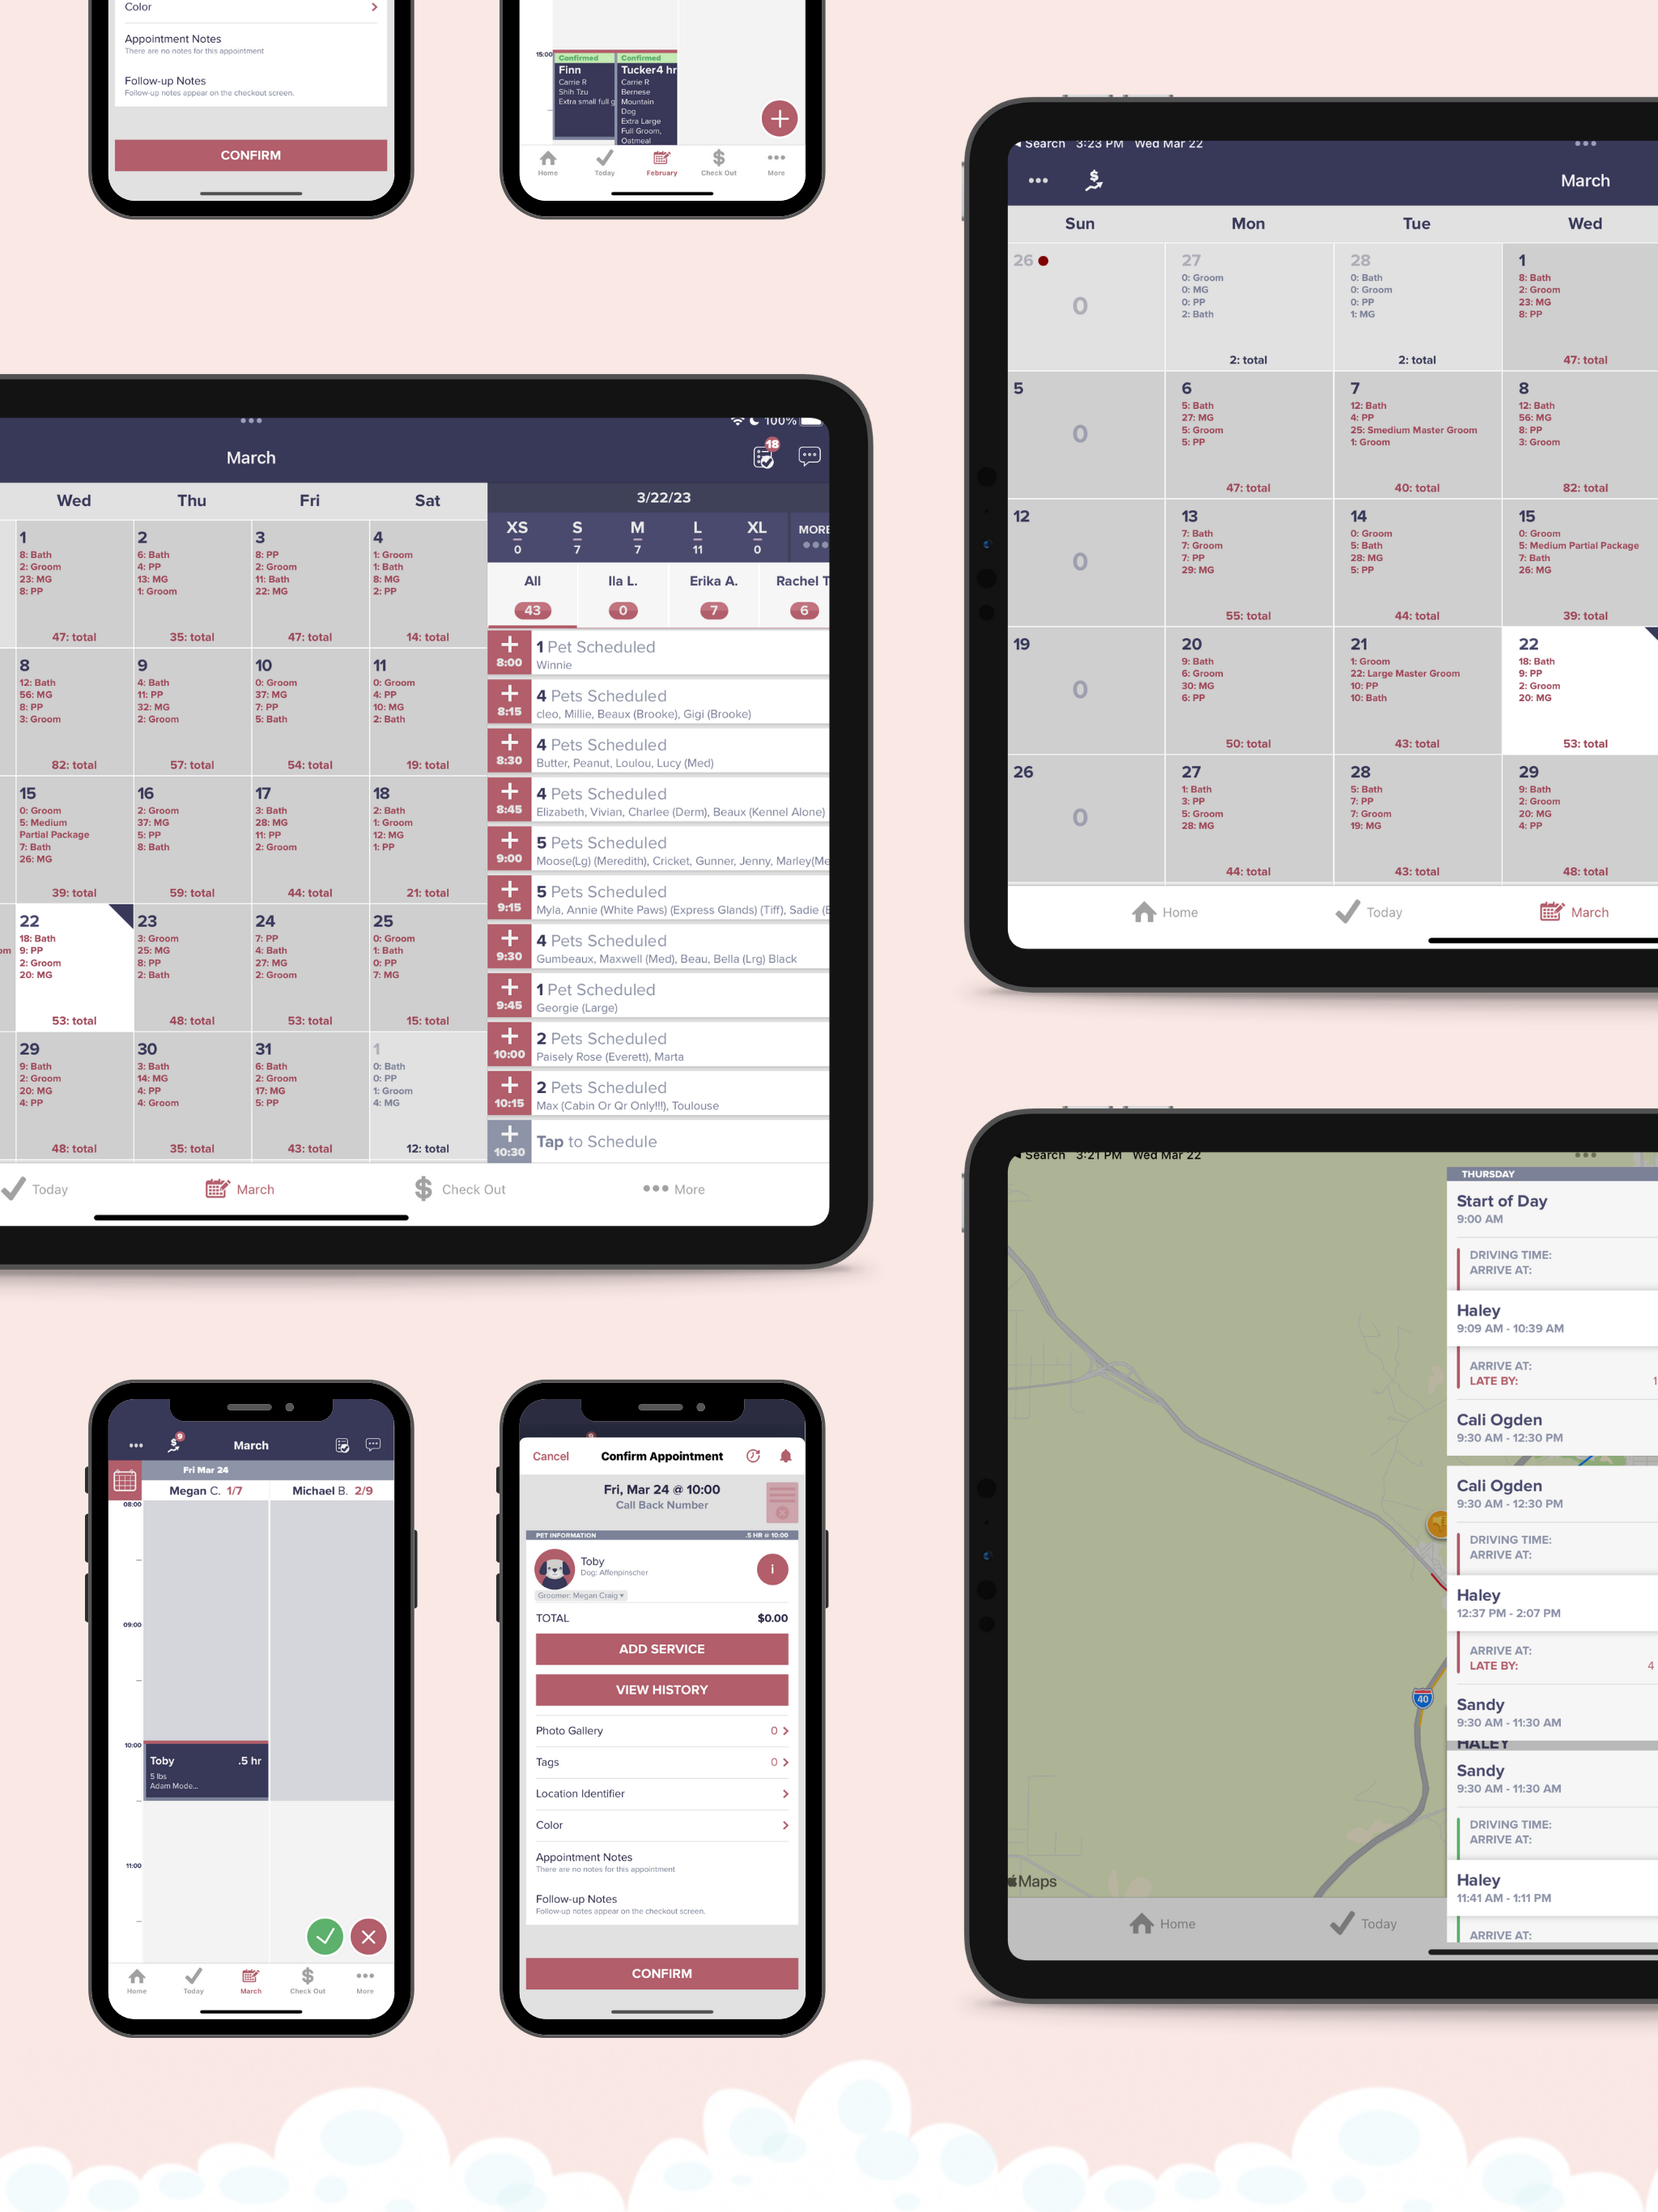 We feature various options of how you can see your schedule ahead and how you input appointments, whether you're mobile or storefront! Inputting and confirming appointments has never been easier (screens shown on bottom left).